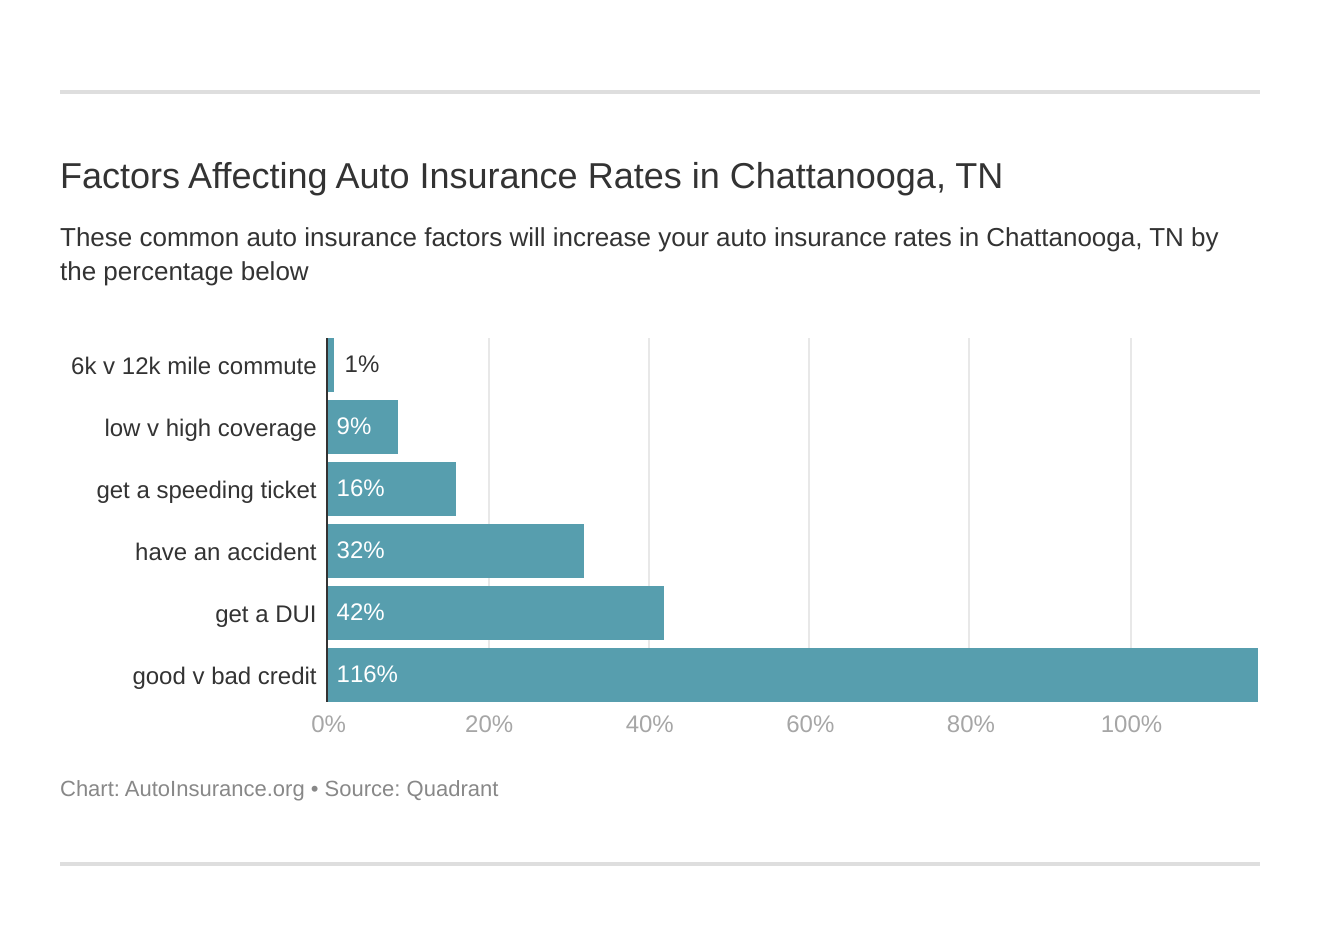 Factors Affecting Auto Insurance Rates in Chattanooga, TN